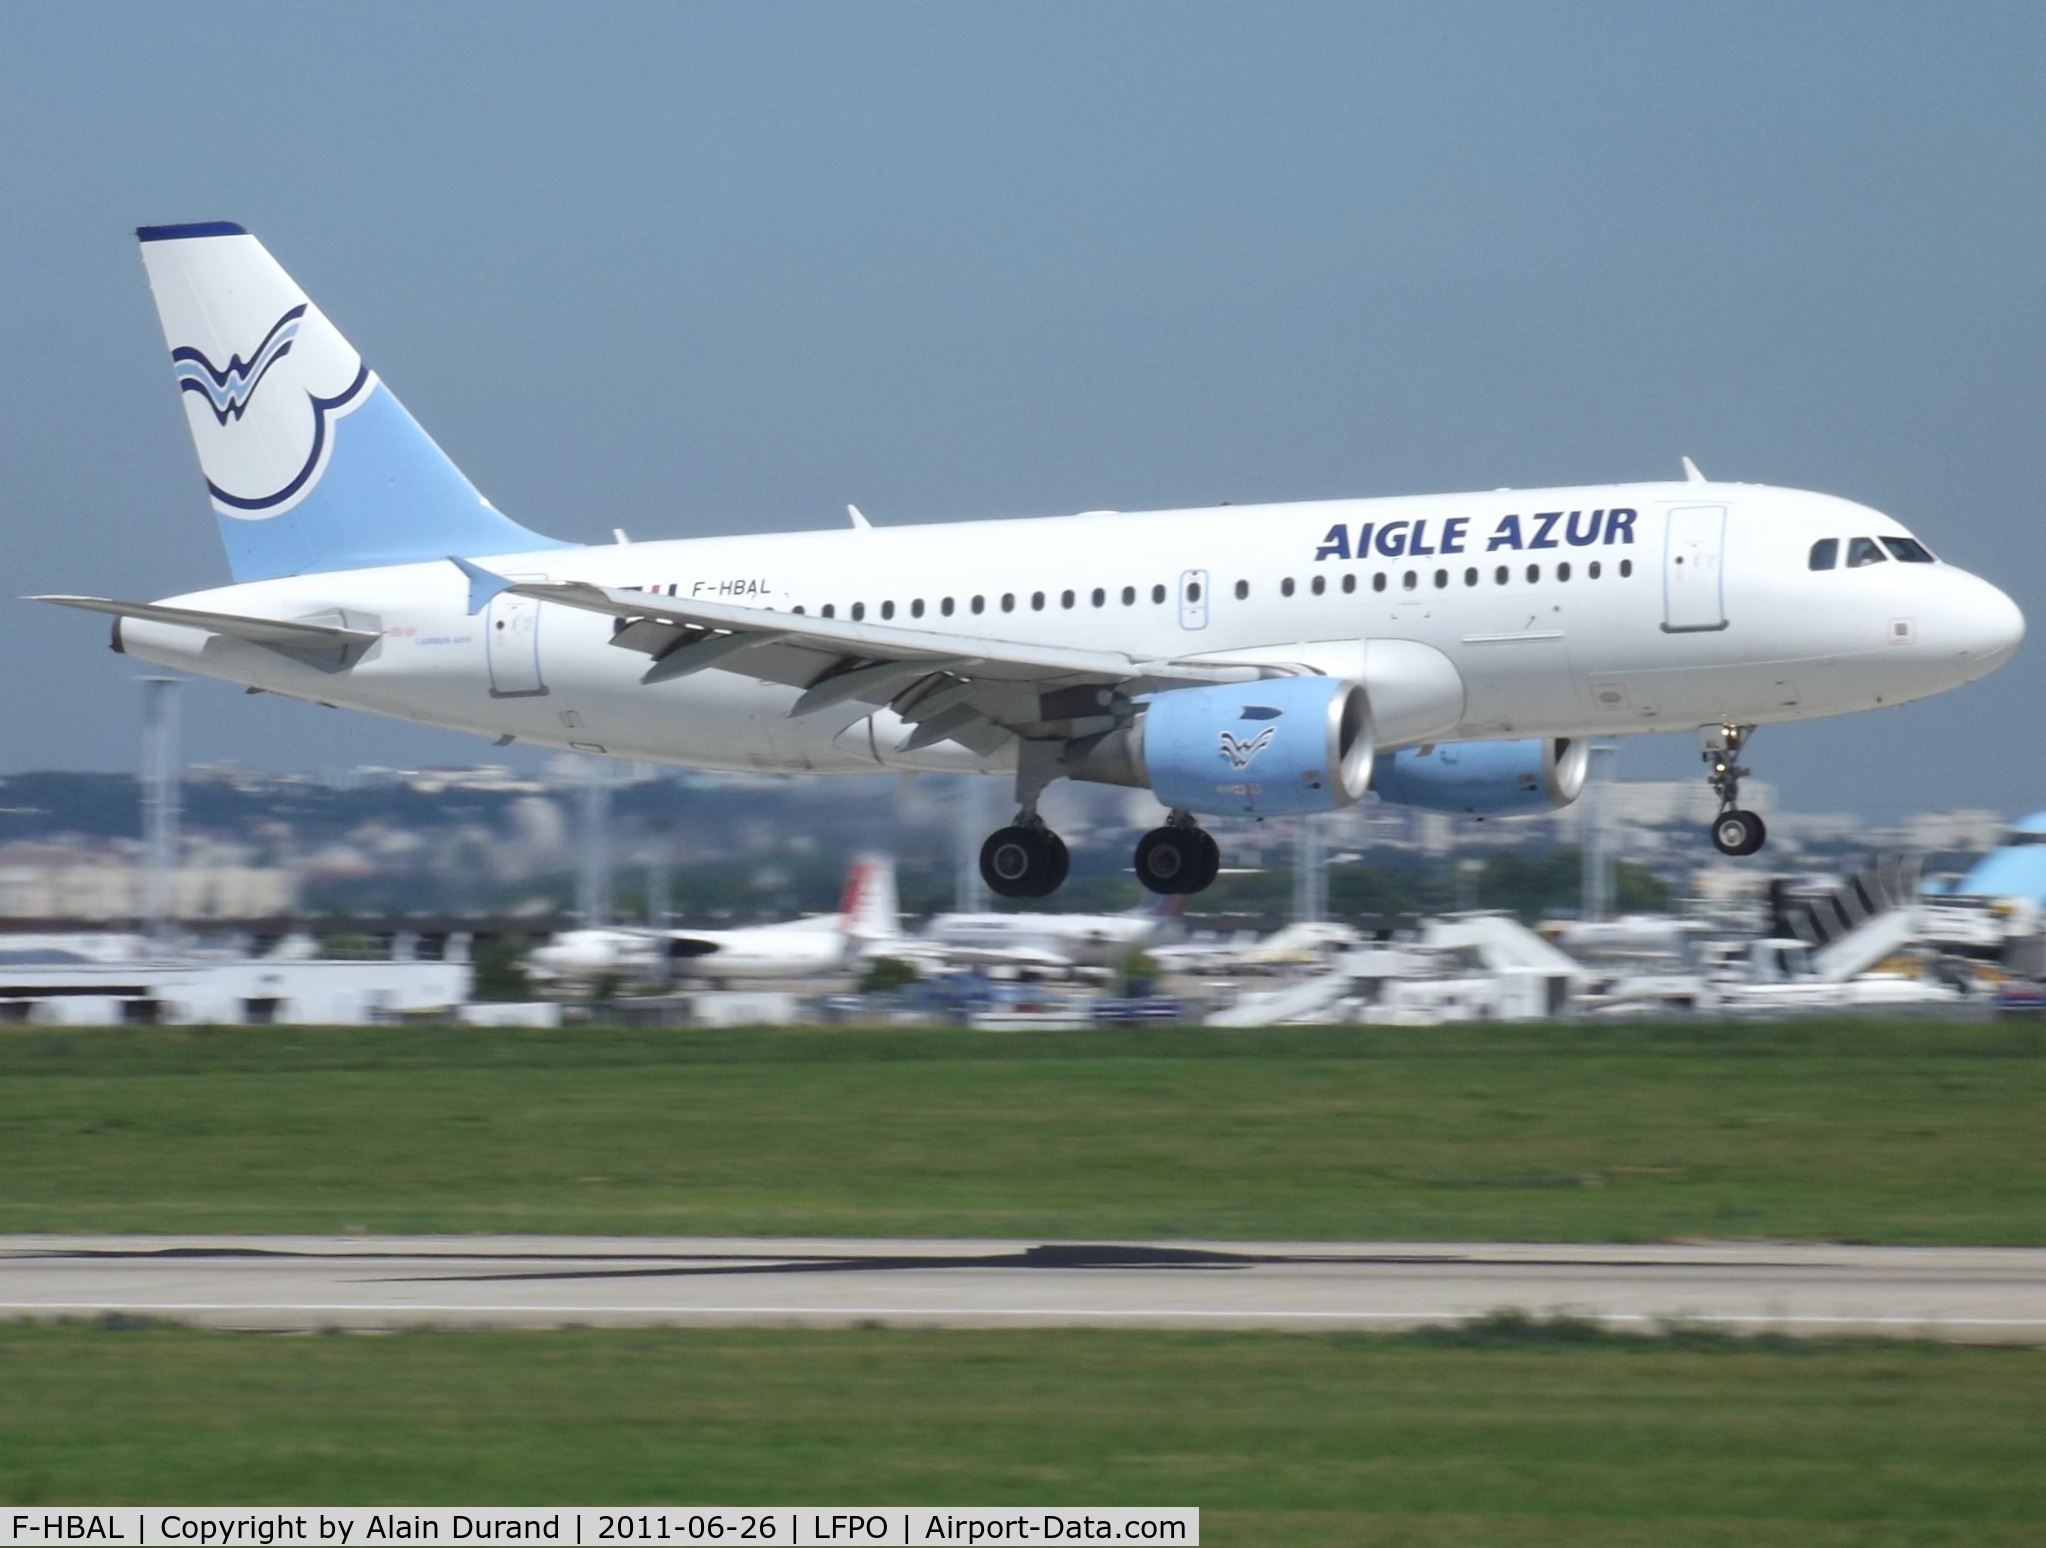 F-HBAL, 2006 Airbus A319-111 C/N 2870, Based Orly/Sud, Aigle Azur flies on a scheduled basis to points in Algeria, Morocco, Tunisia, Mali, Burkina Faso, Senegal, Portugal. While on her way back, Alpha-Lima was vectored on runway 08/26 which is normally in use when easterly winds prevail